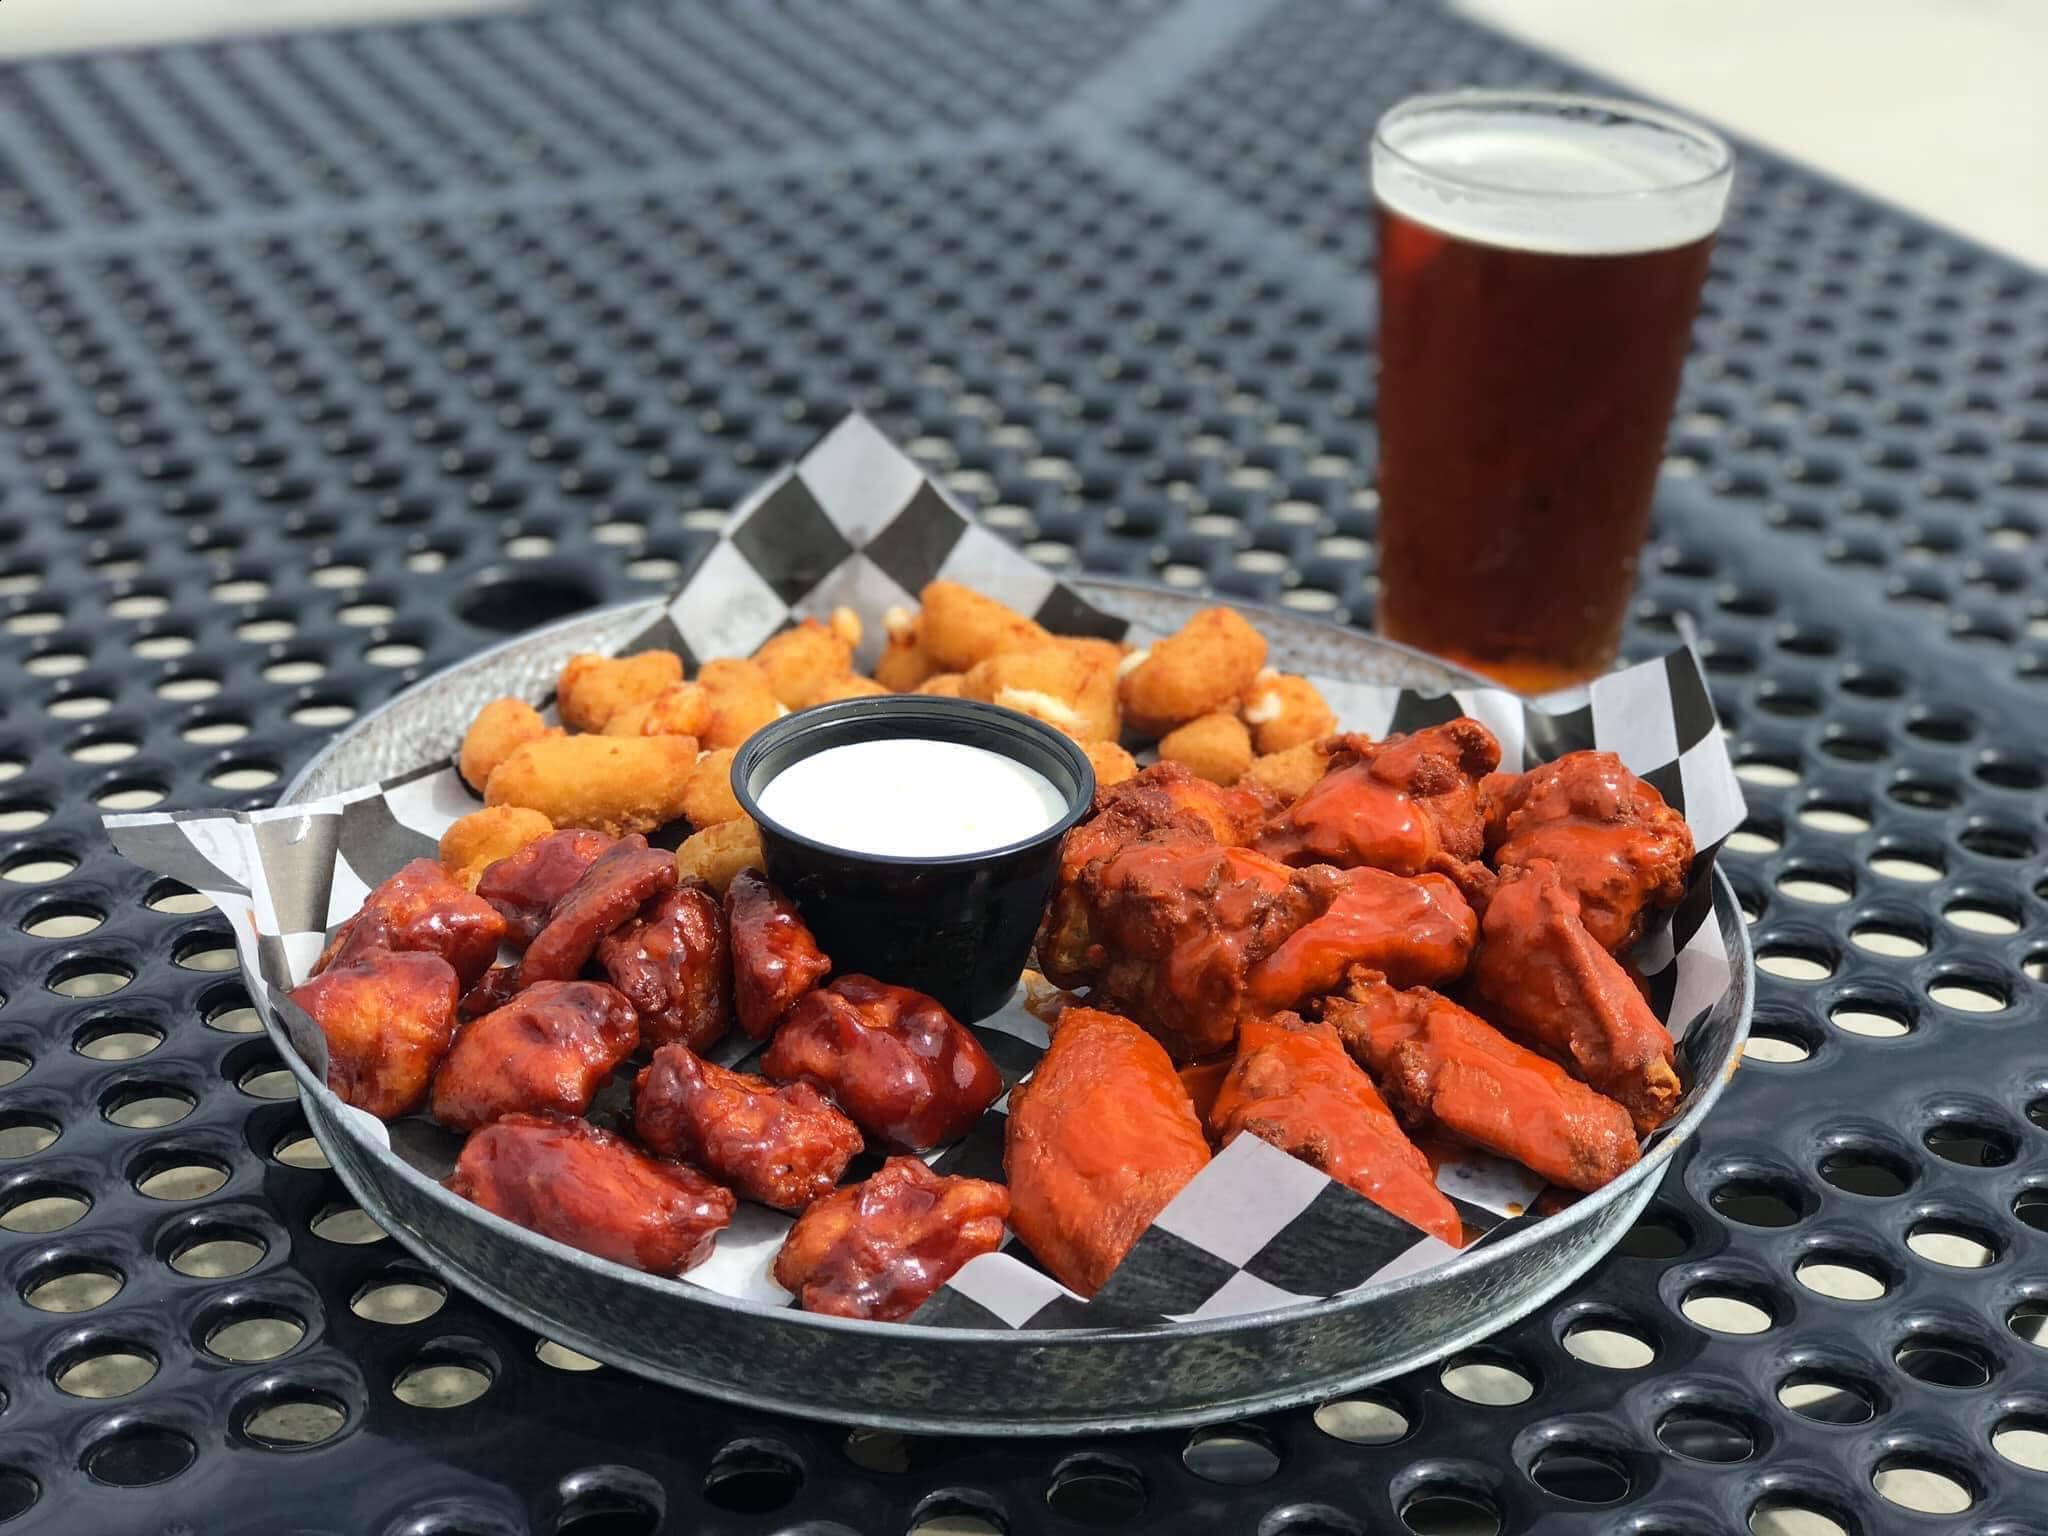 Wing Platter at the Gym